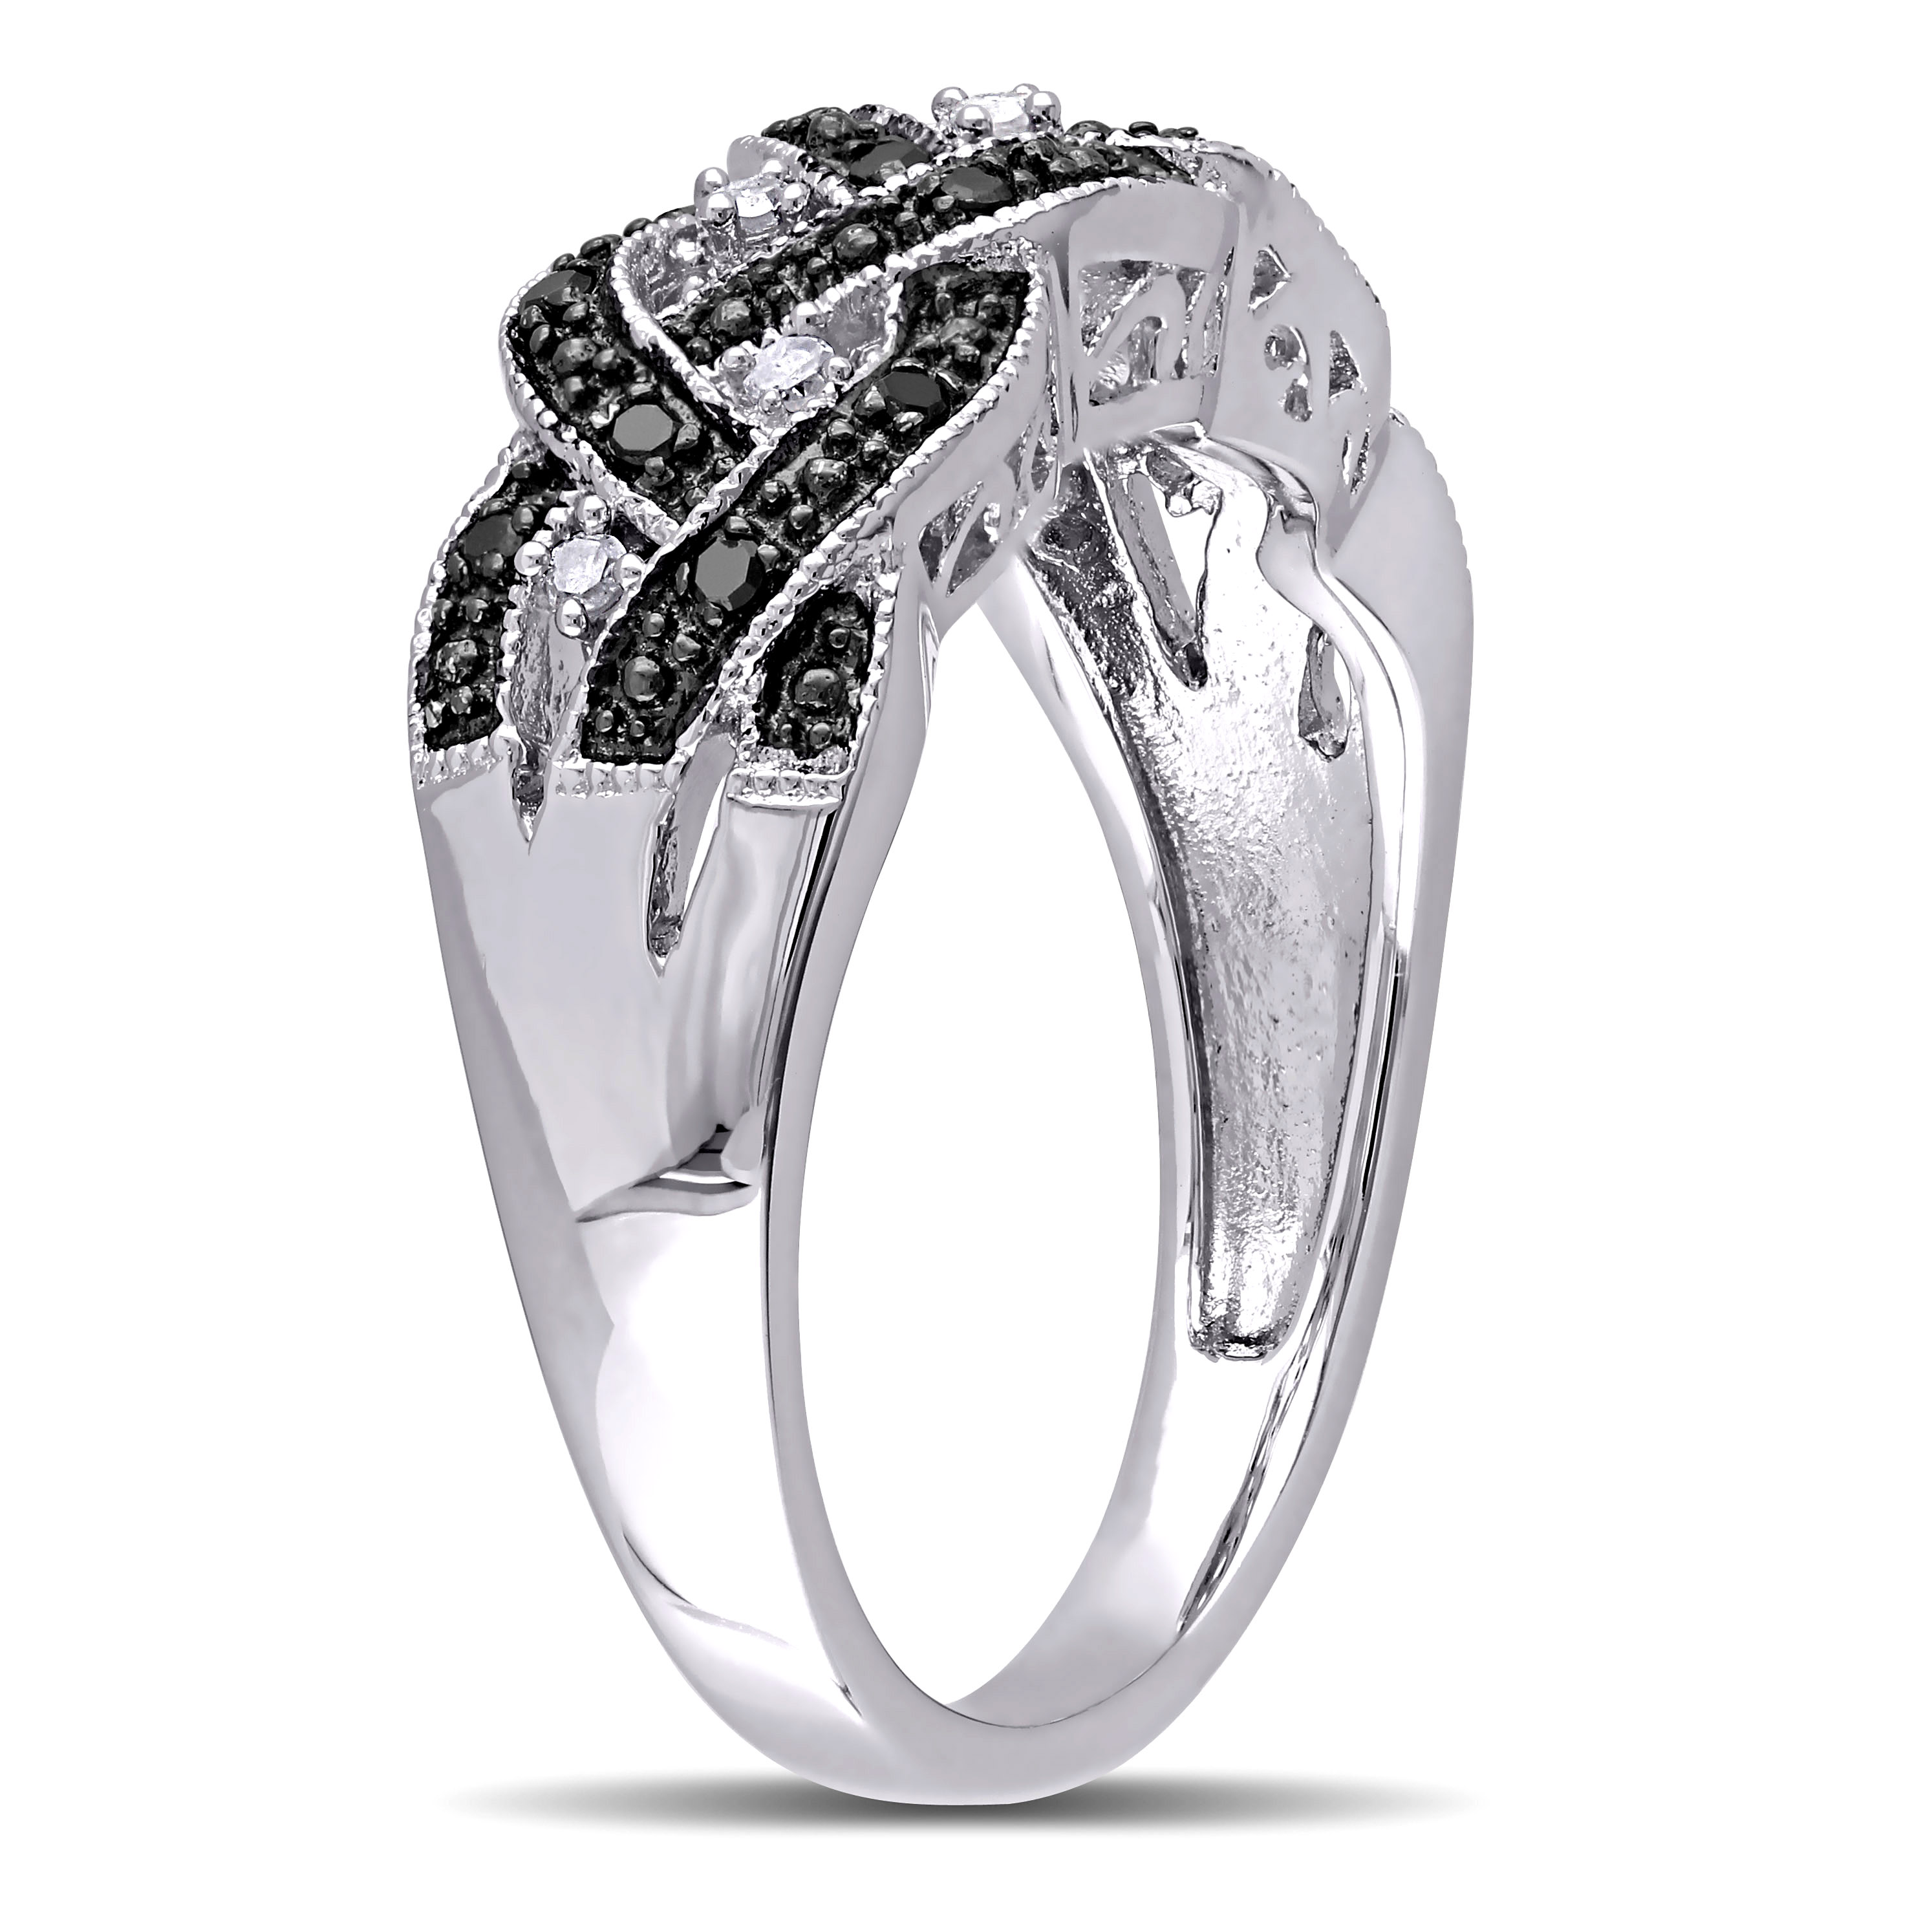 1/6 CT TW Black and White Diamond Braided Anniversary Band in Sterling Silver with Black Rhodium